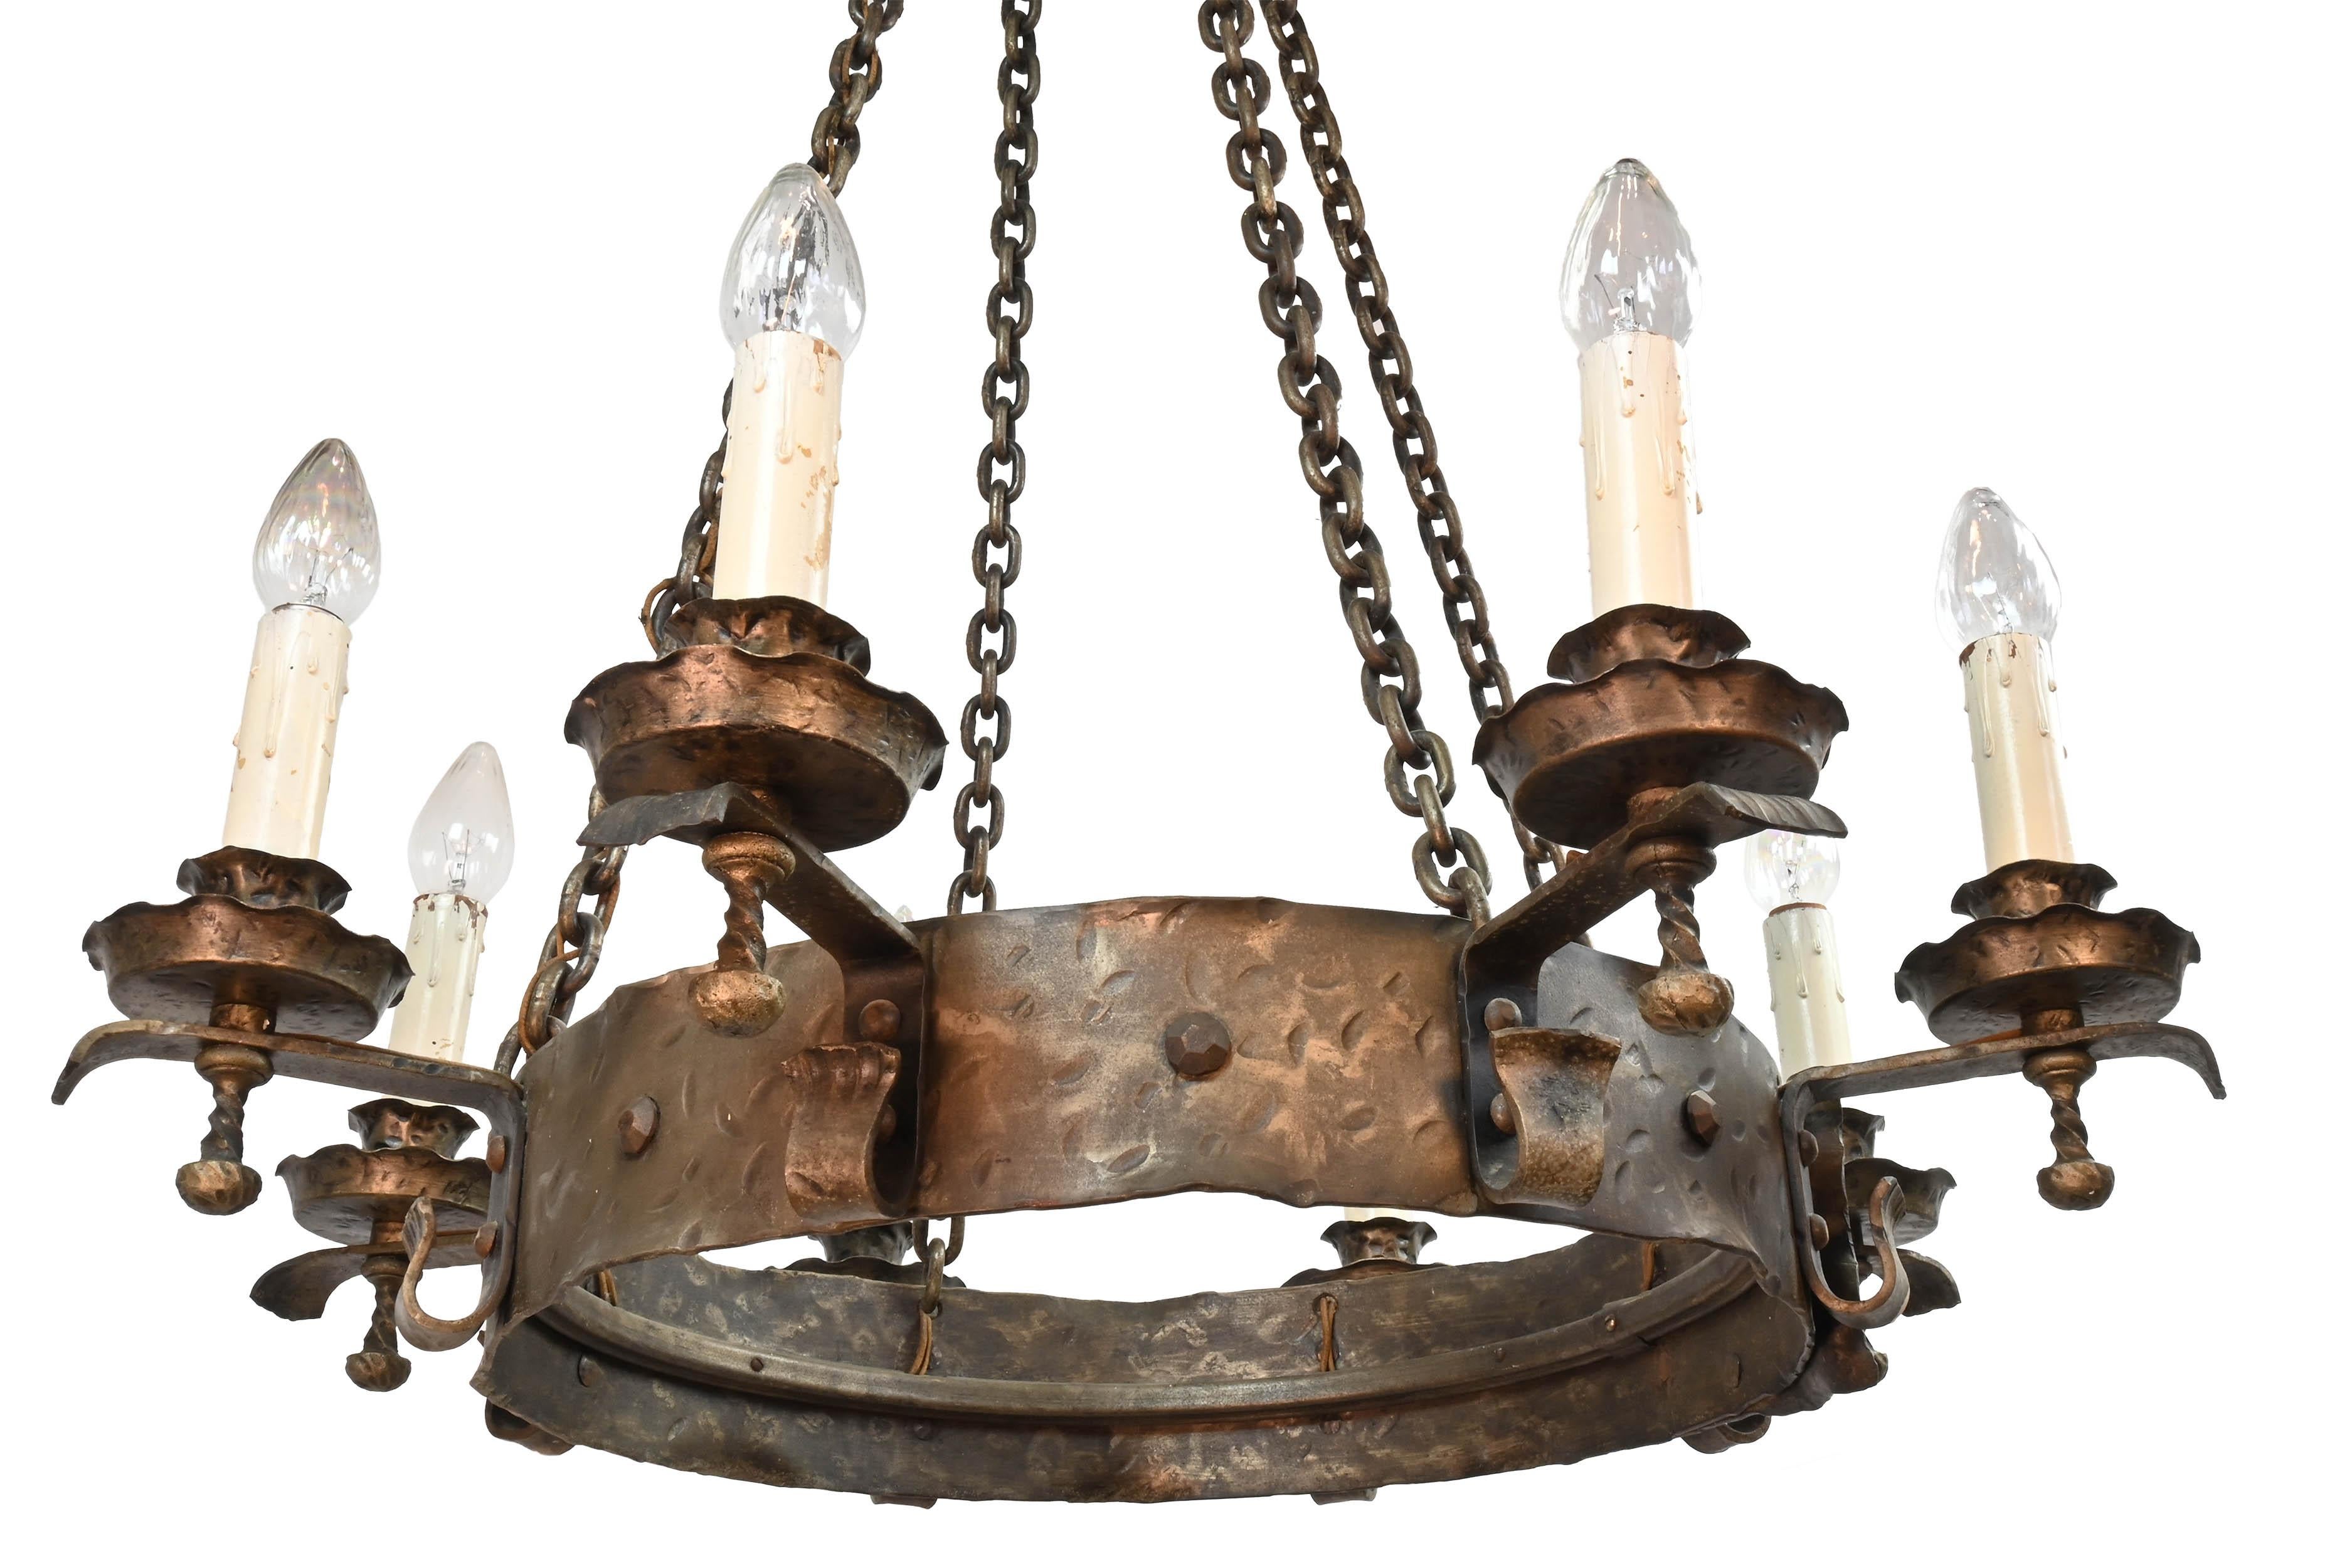 This fixture originally hung from a 22 foot ceiling, so if you require large illumination there is plenty of hanging options to make it work from your ceiling height,

circa 1922 
Condition: Age consistent, wonderful design, open and